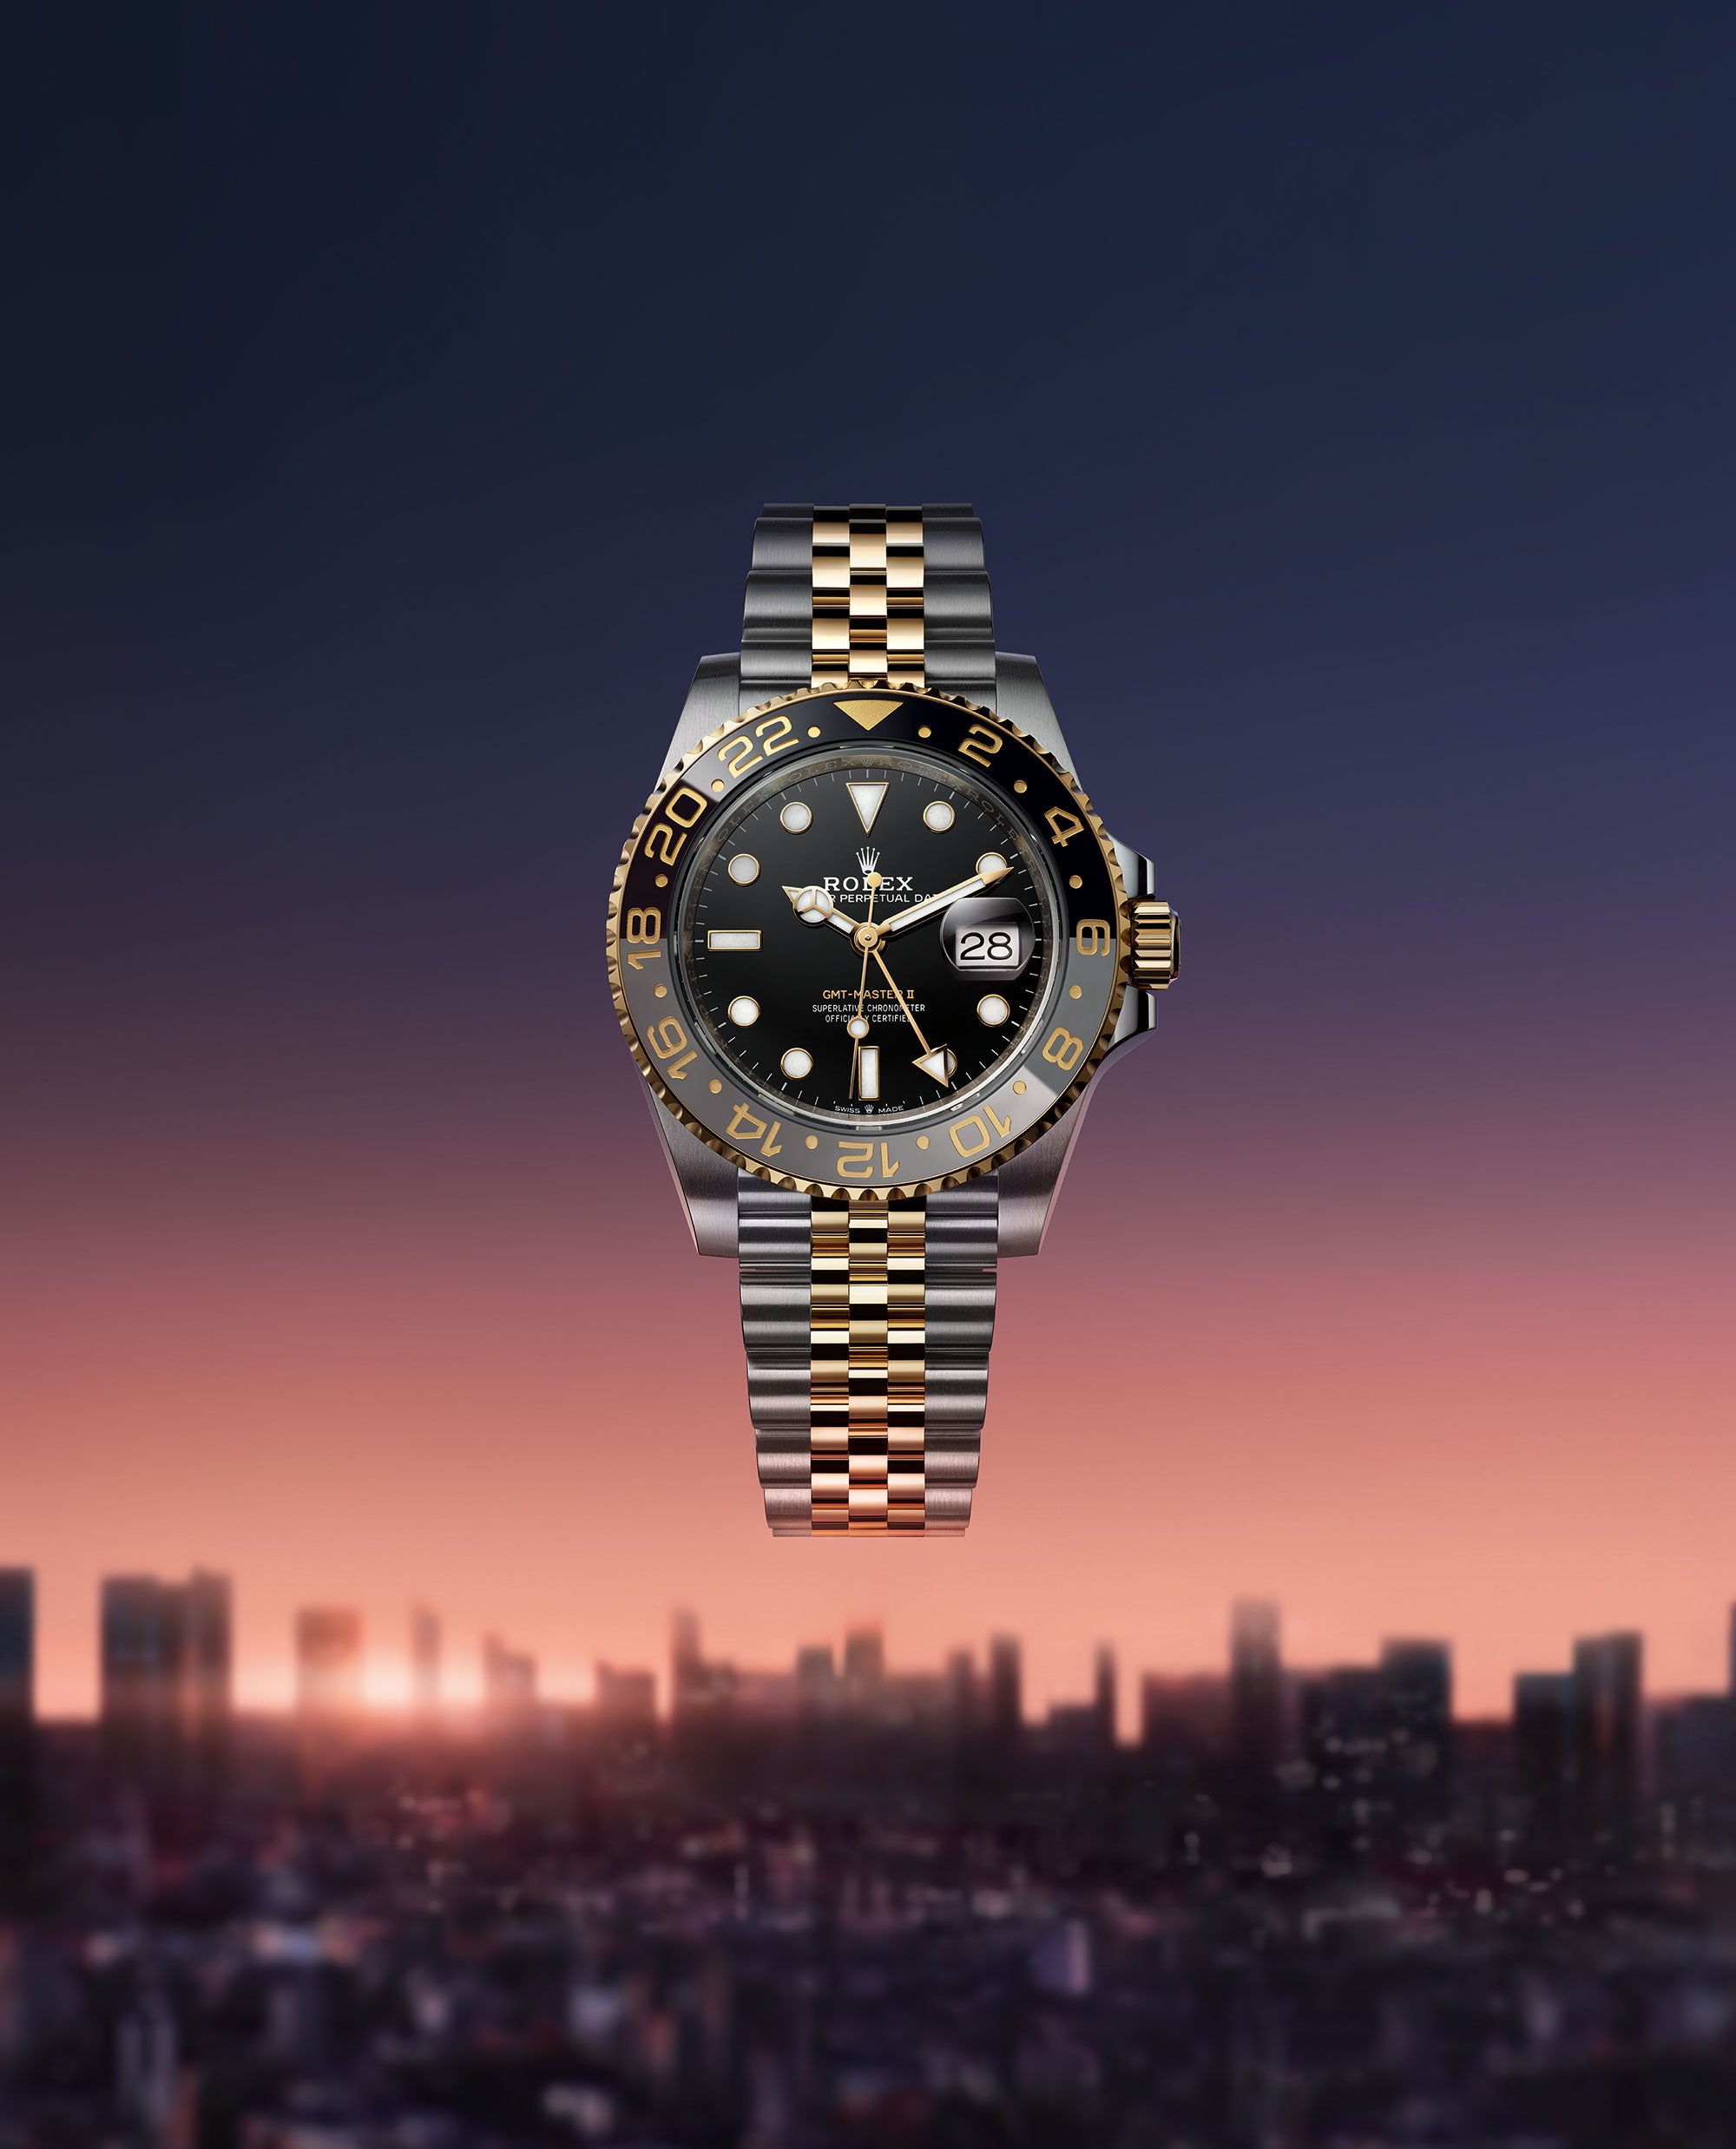 GMT-Master II with Yellow Gold and Black Lacquer Dial with City Skyline Background